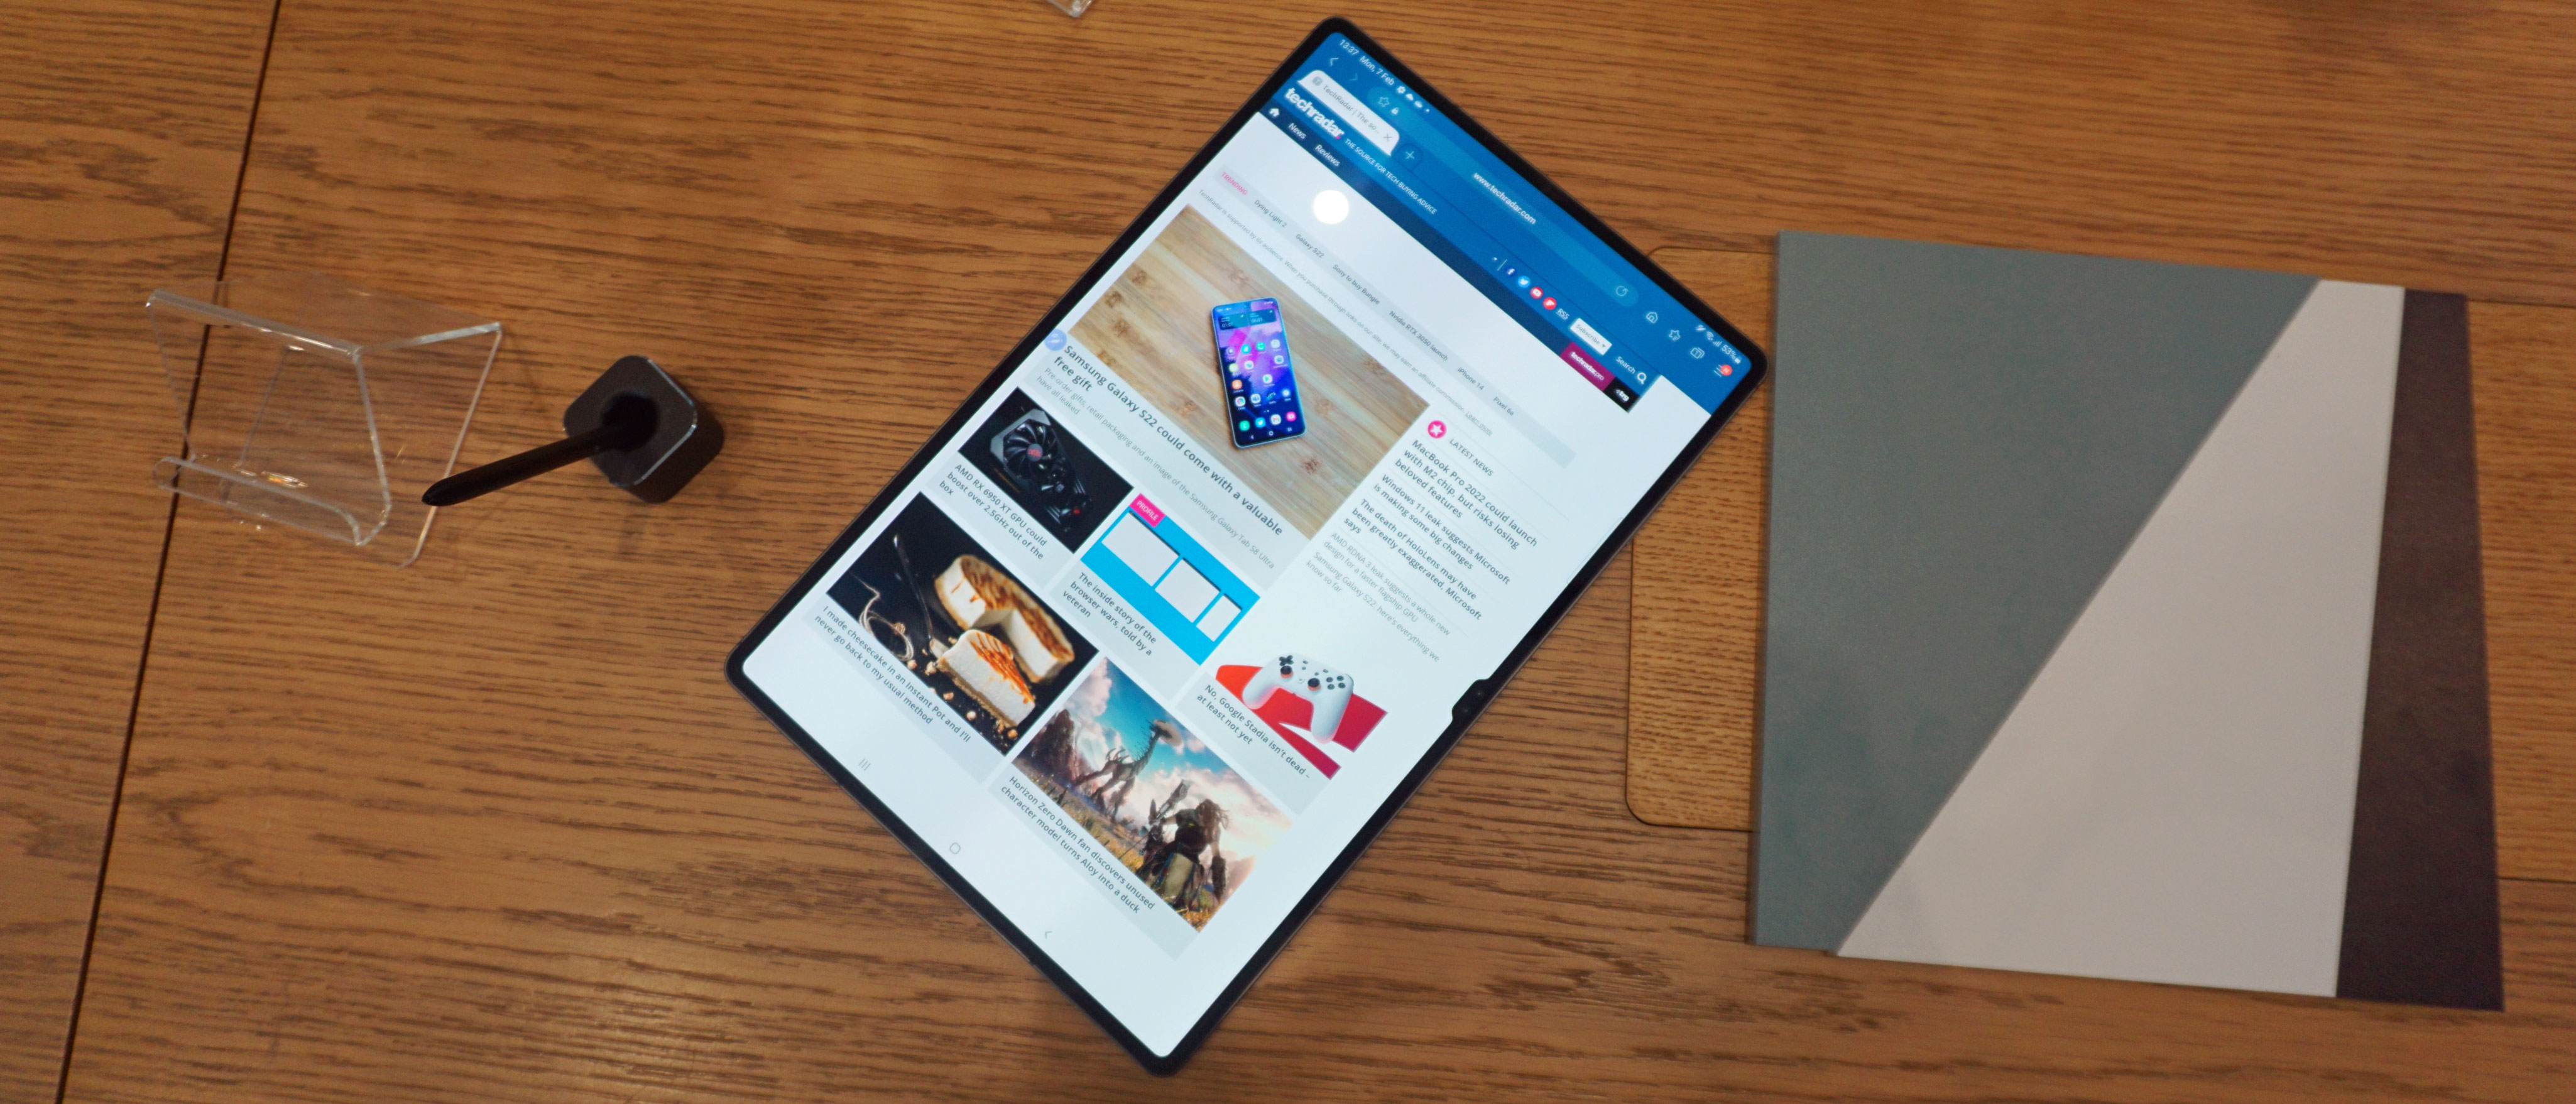 Samsung Galaxy Tab S8 Ultra: a gigantic Android tablet that'll